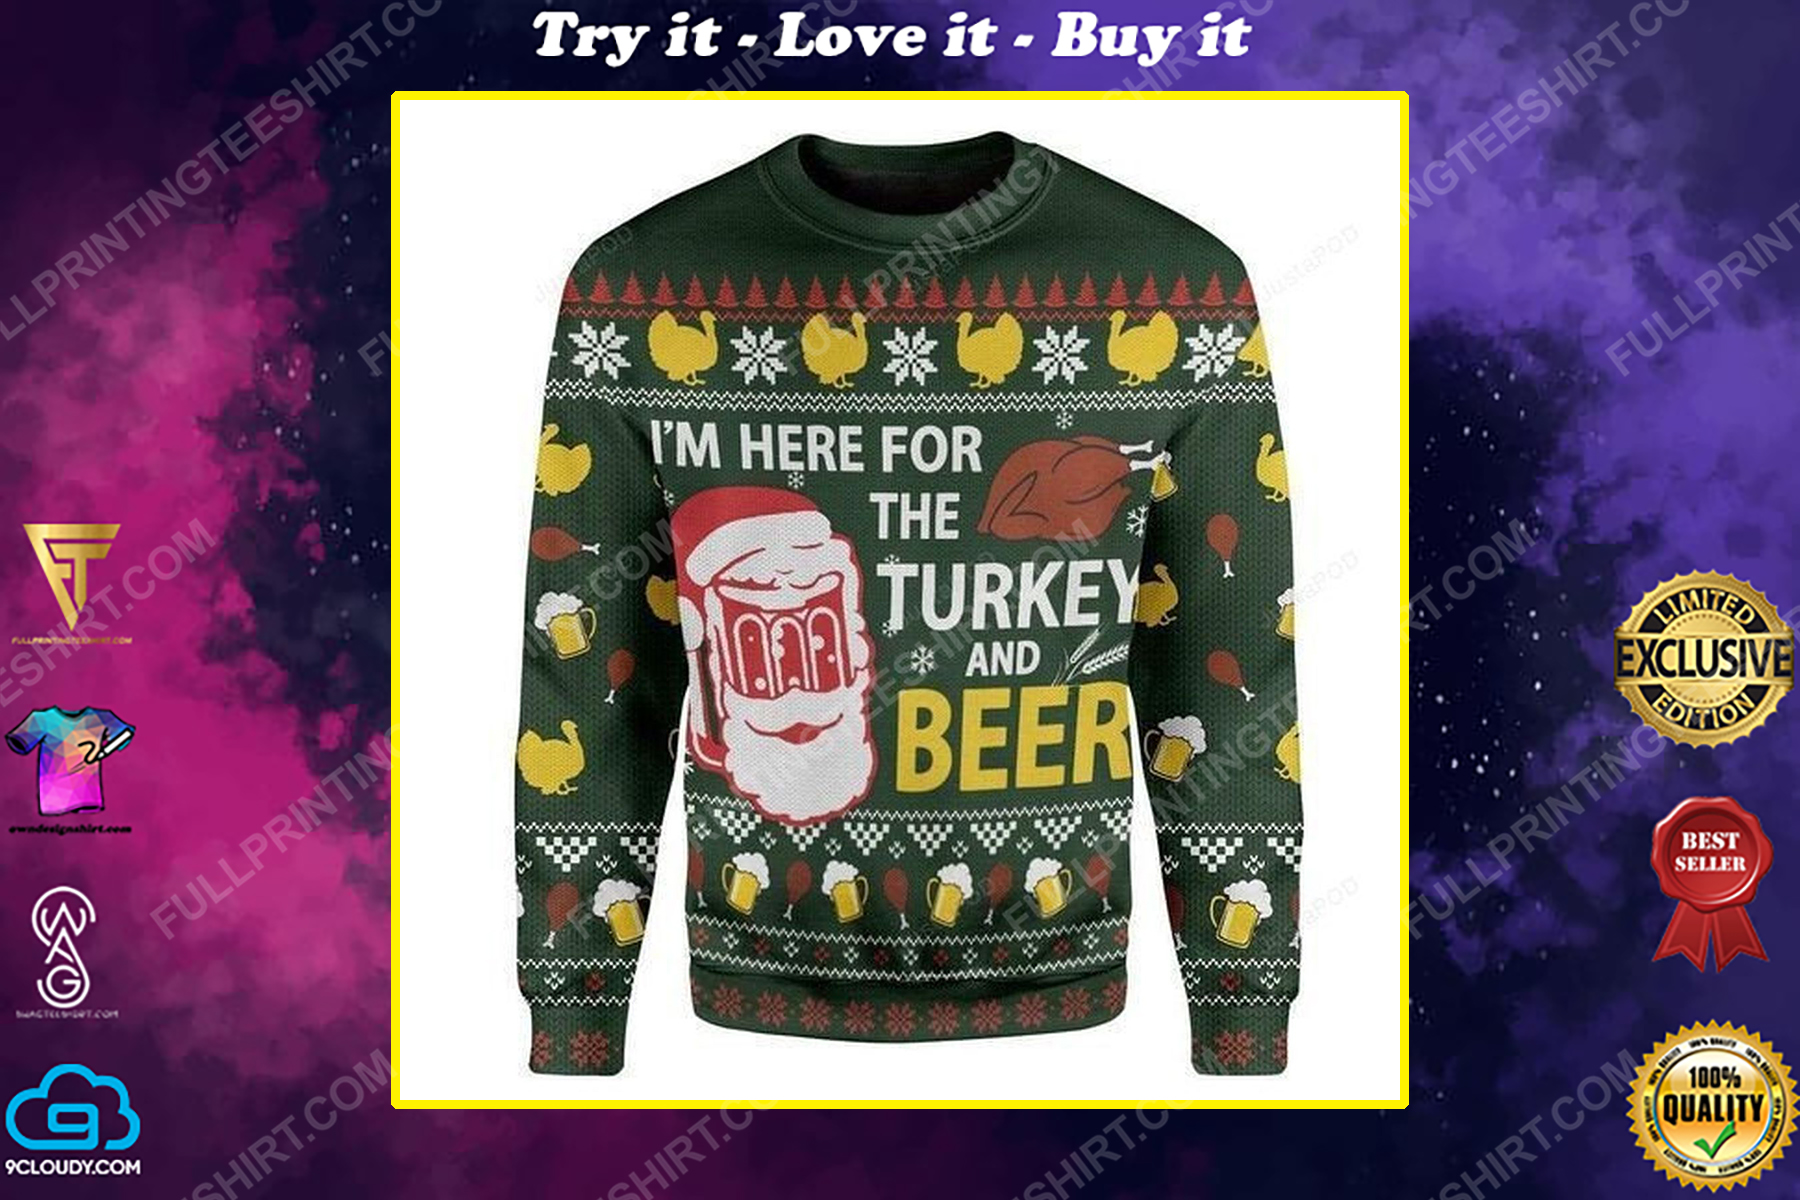 I'm here for the turkey and beer full print ugly christmas sweater